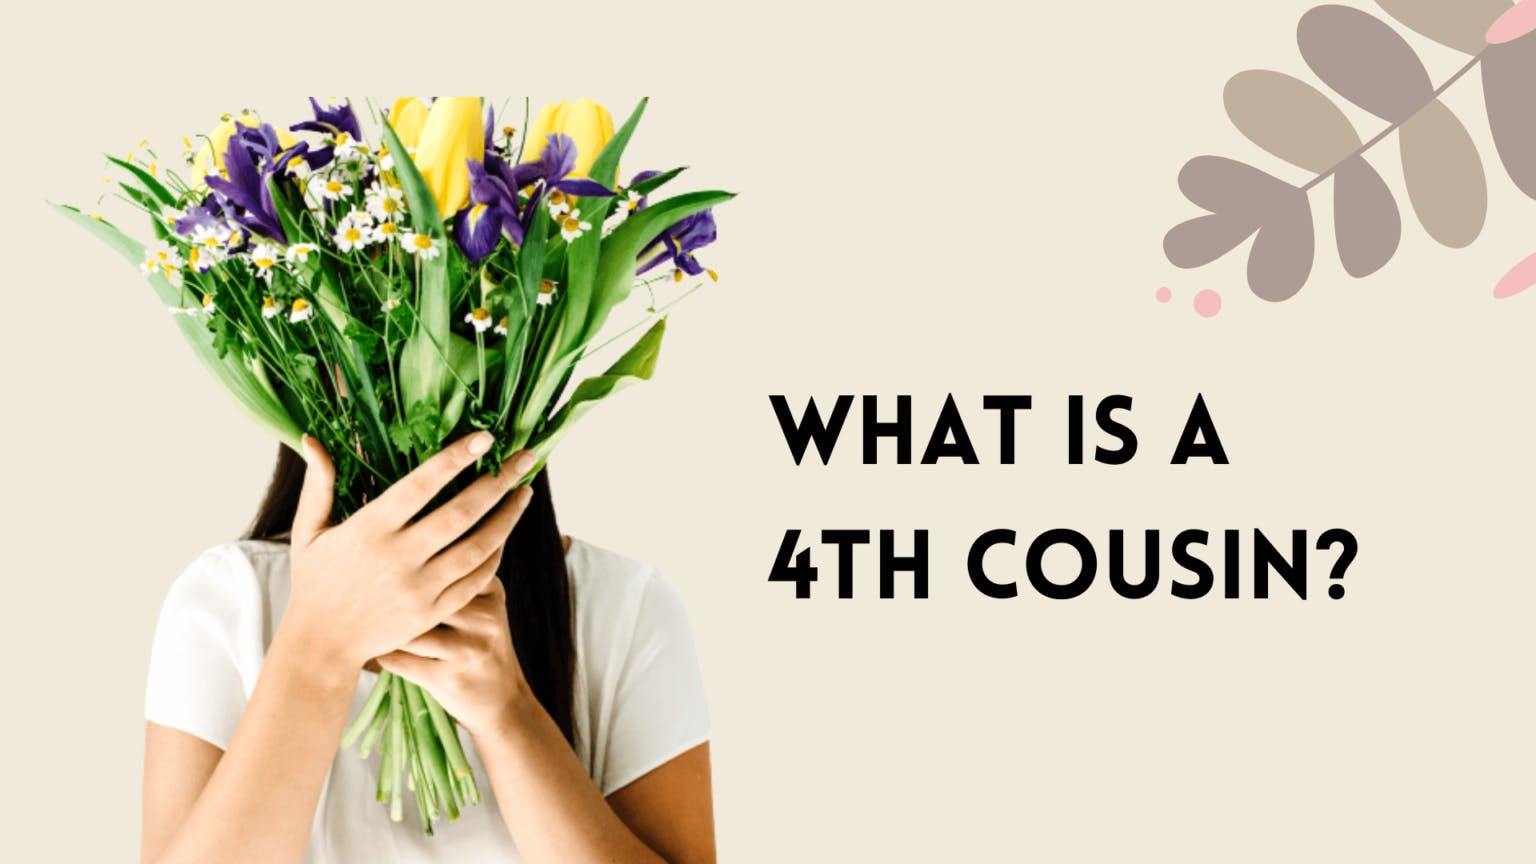 What is a 4th cousin?